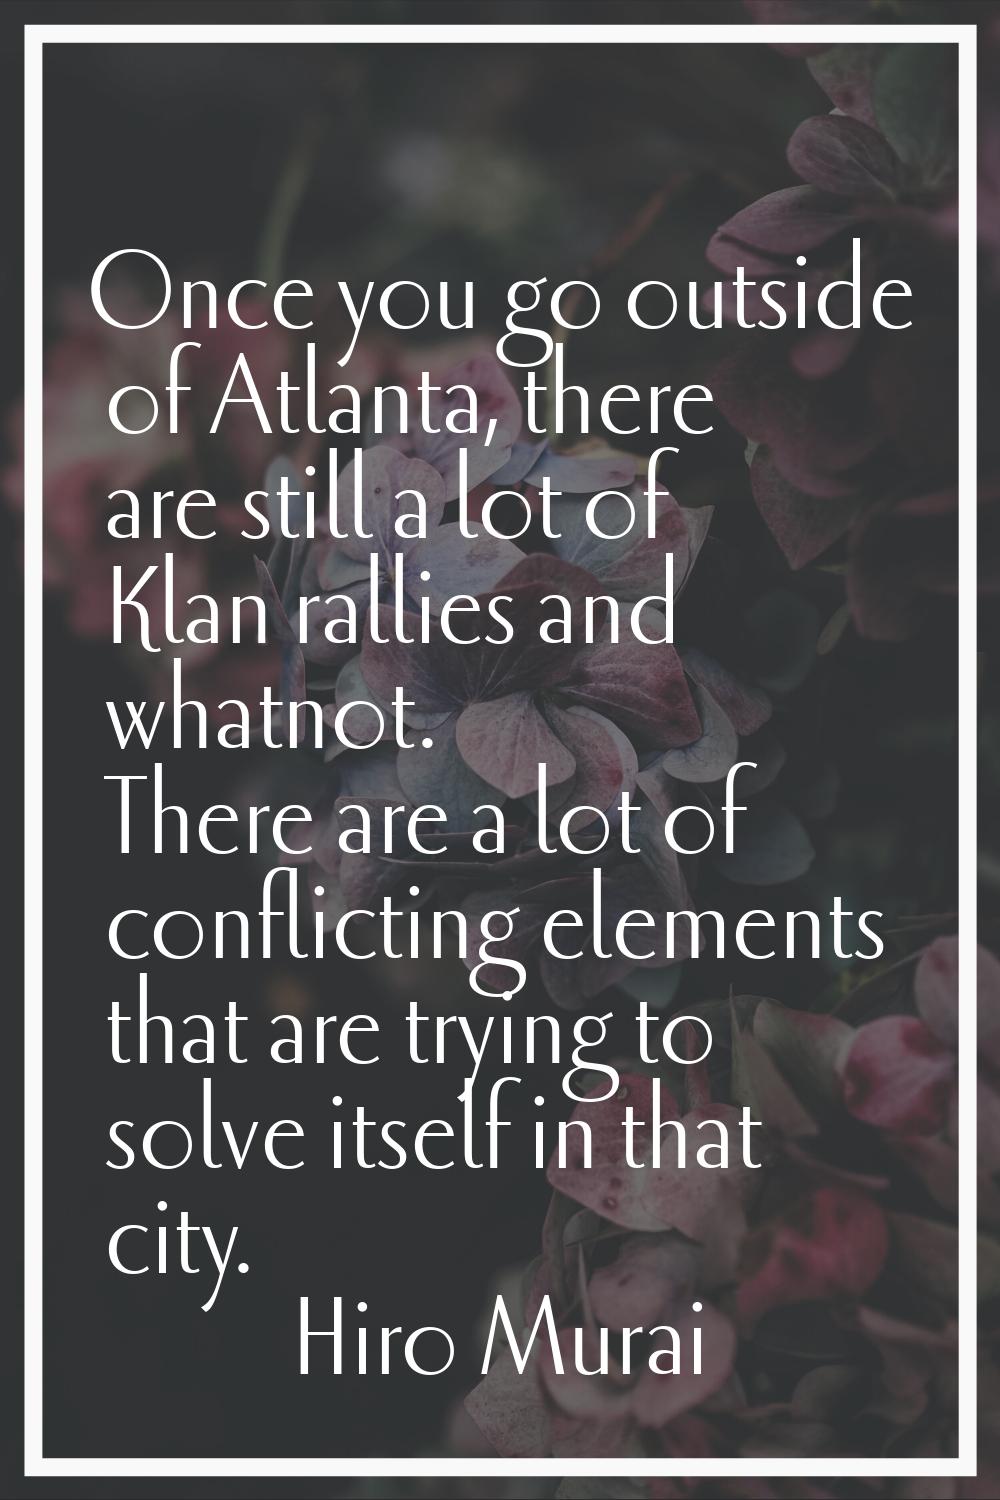 Once you go outside of Atlanta, there are still a lot of Klan rallies and whatnot. There are a lot 